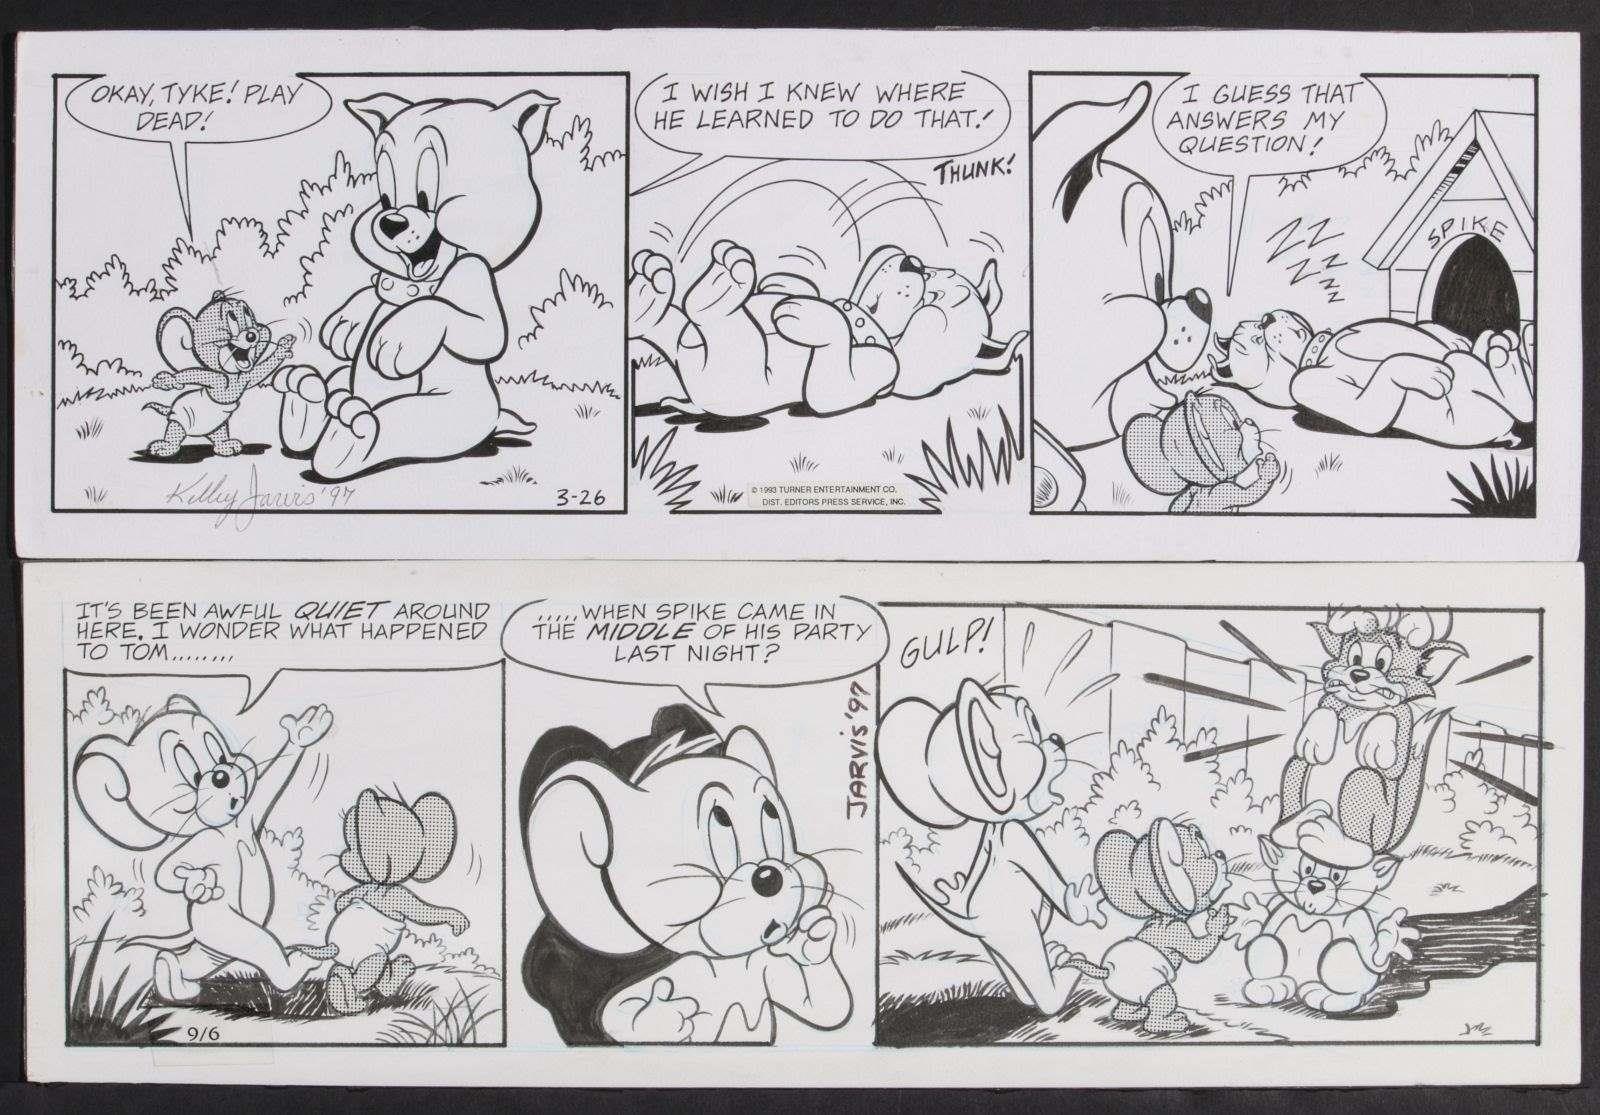 TWO ORIGINAL TOM & JERRY COMIC STRIPS | DIRK SOULIS AUCTIONS